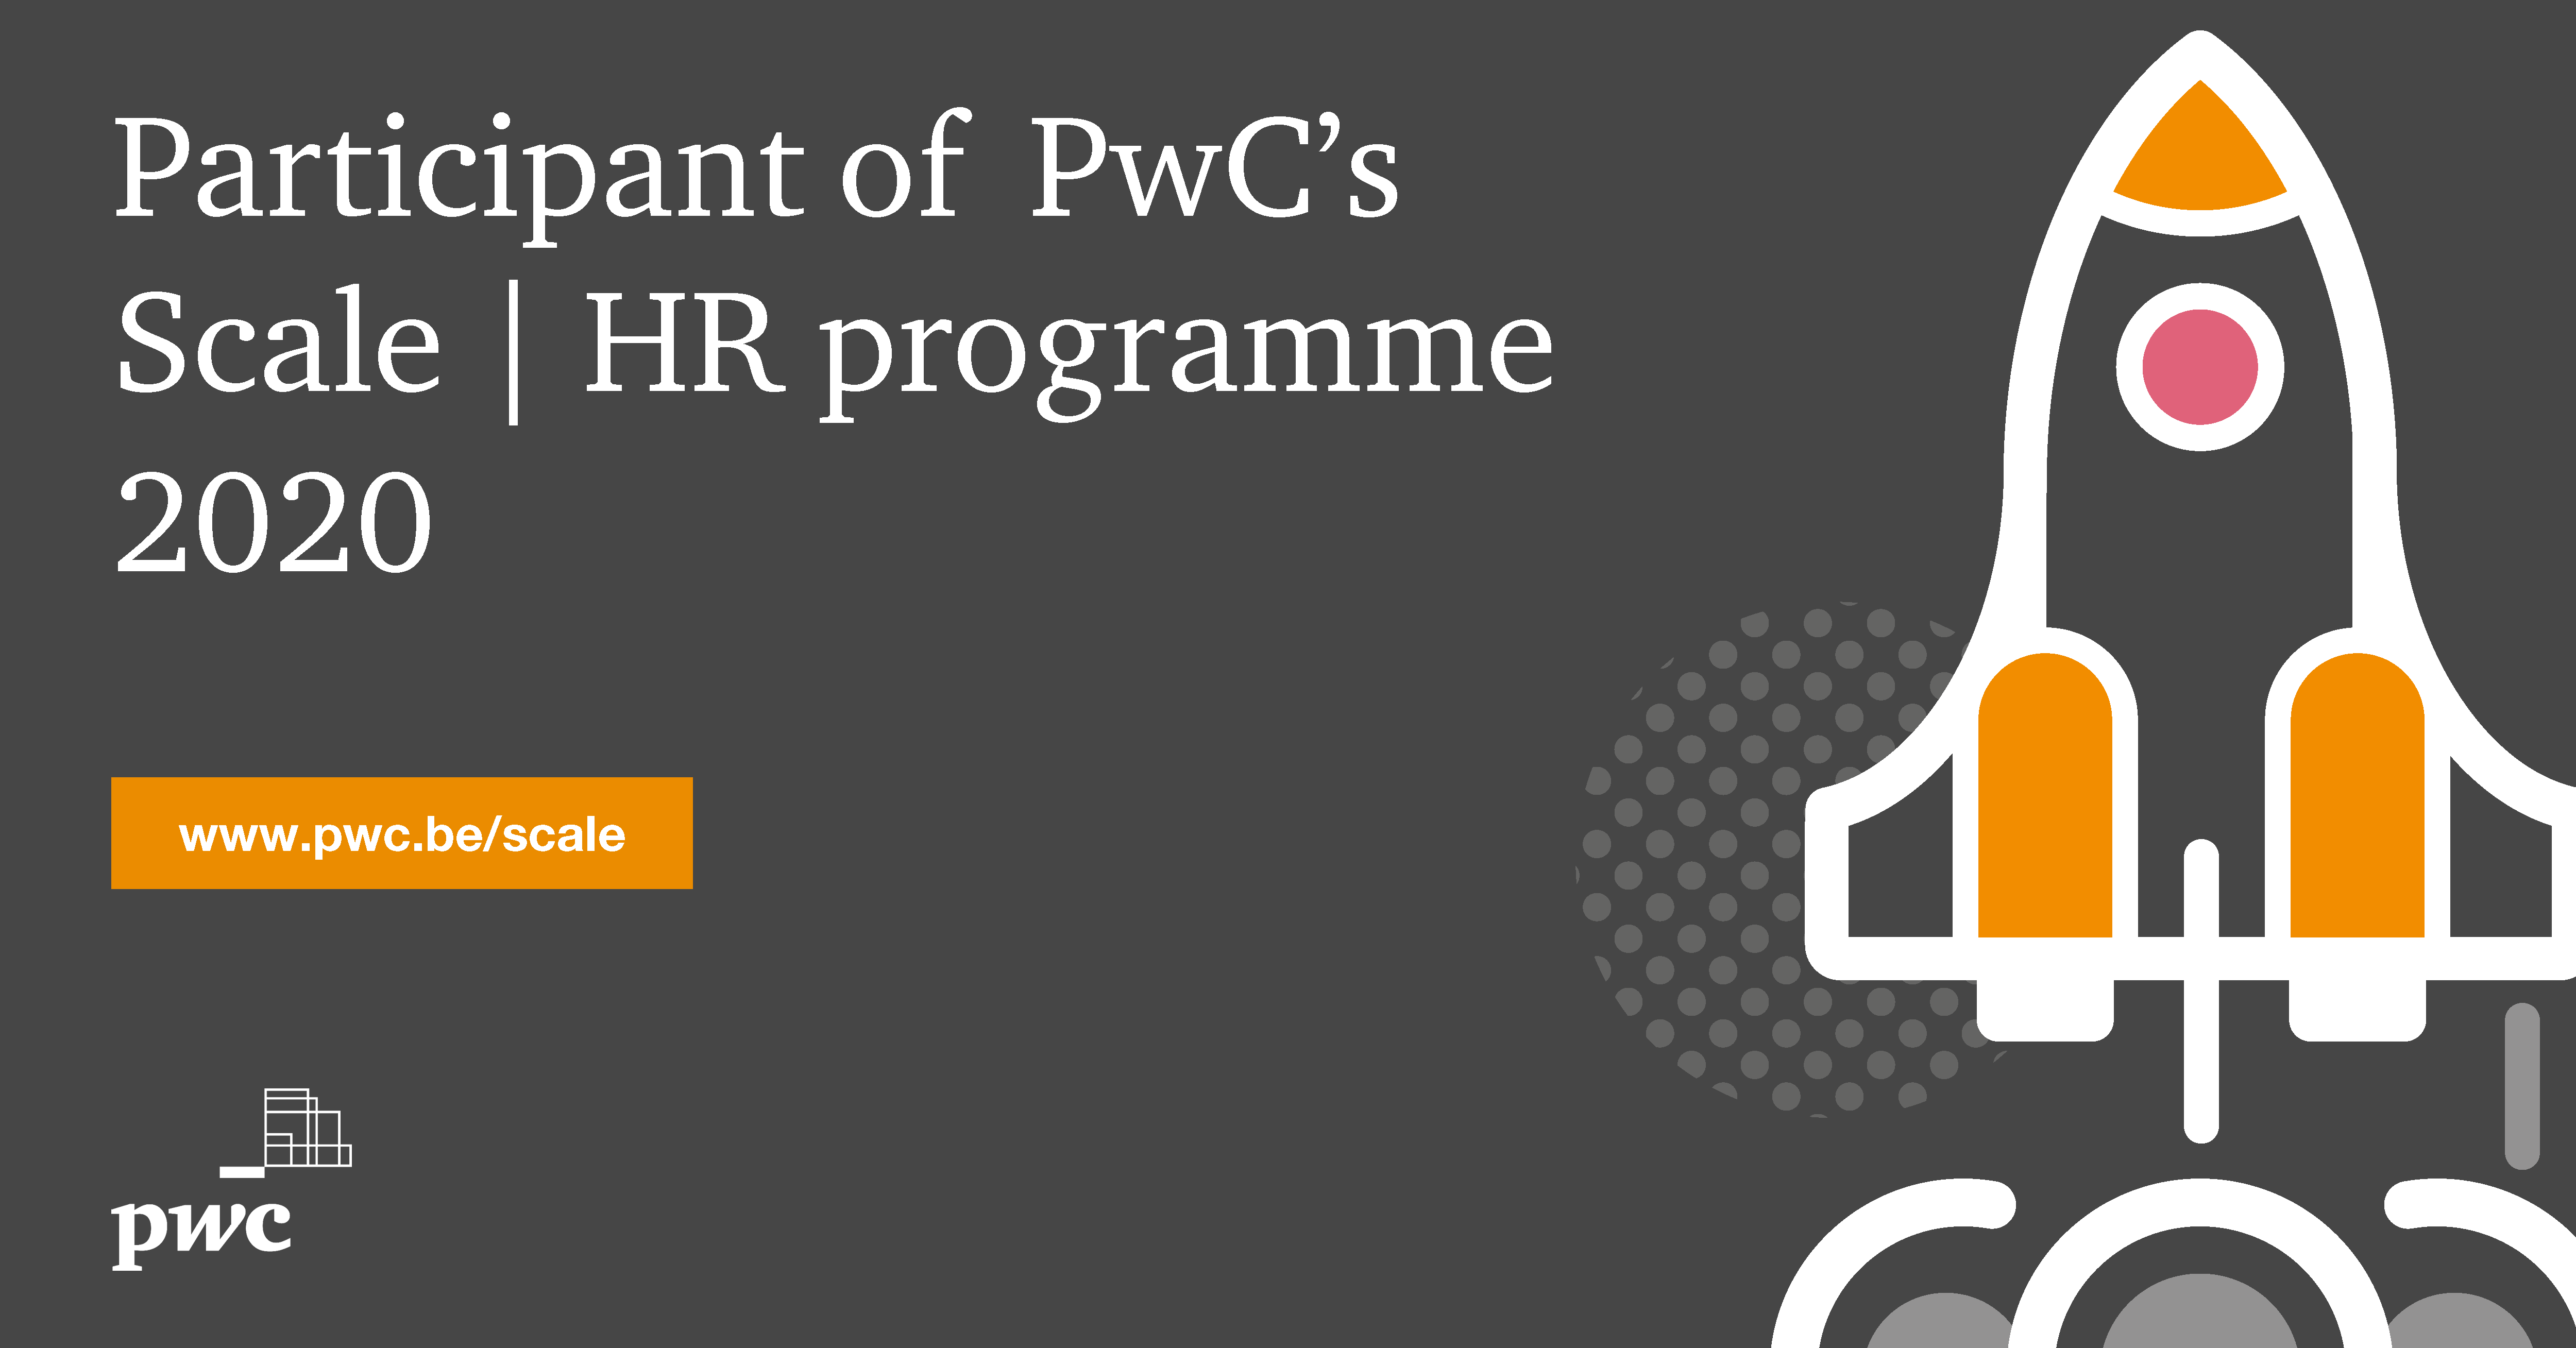 Participant of PwC's Scale HR programme 2020